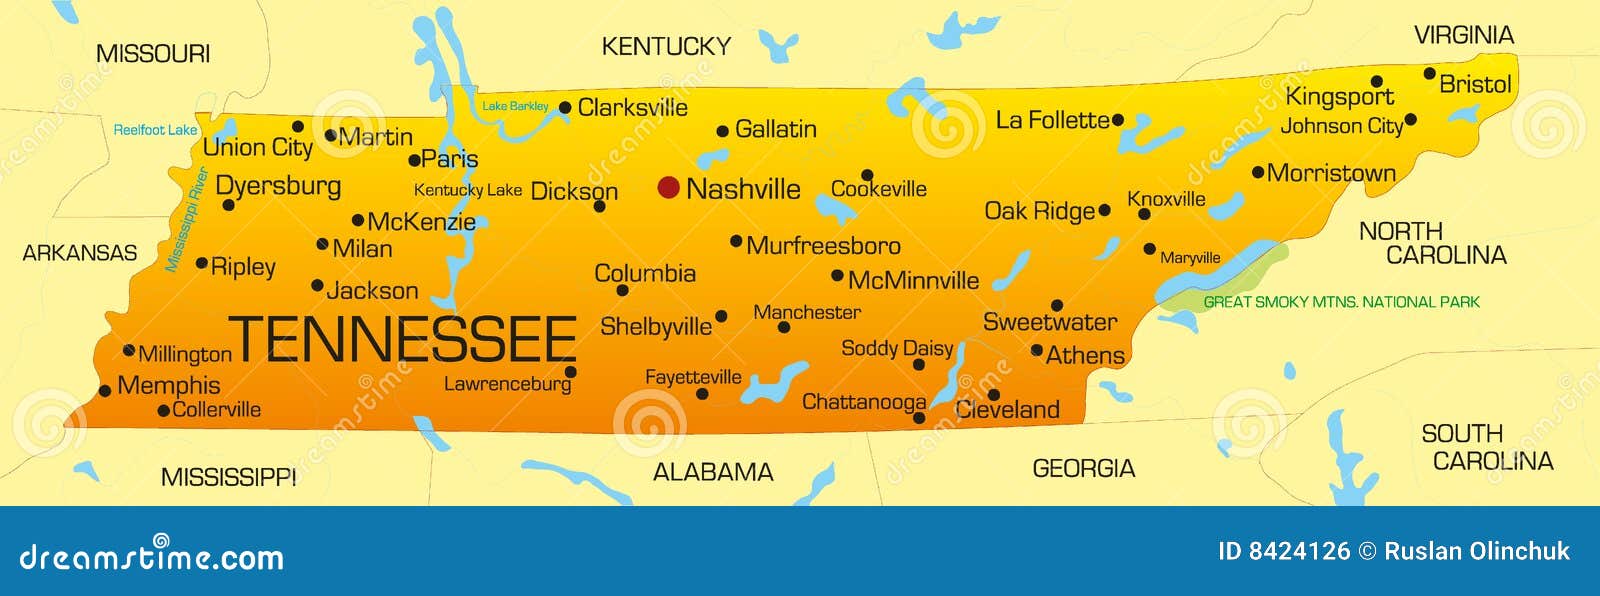 free clipart map of tennessee - photo #49